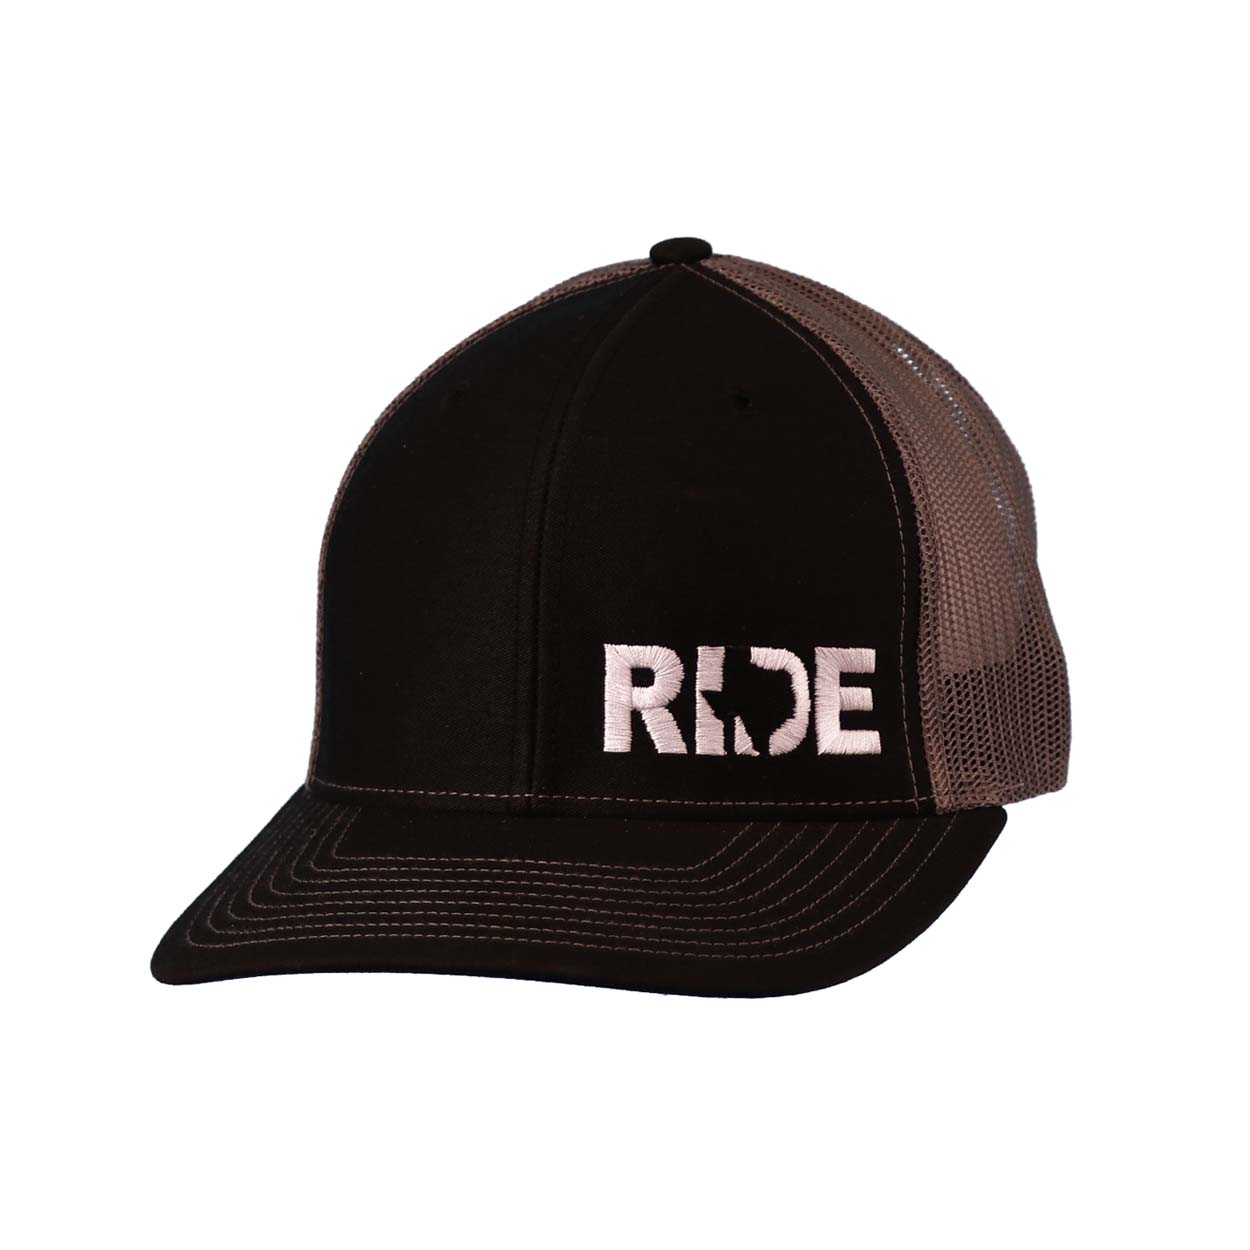 Ride Texas Classic Pro Night Out Embroidered Snapback Trucker Hat Black/Gray